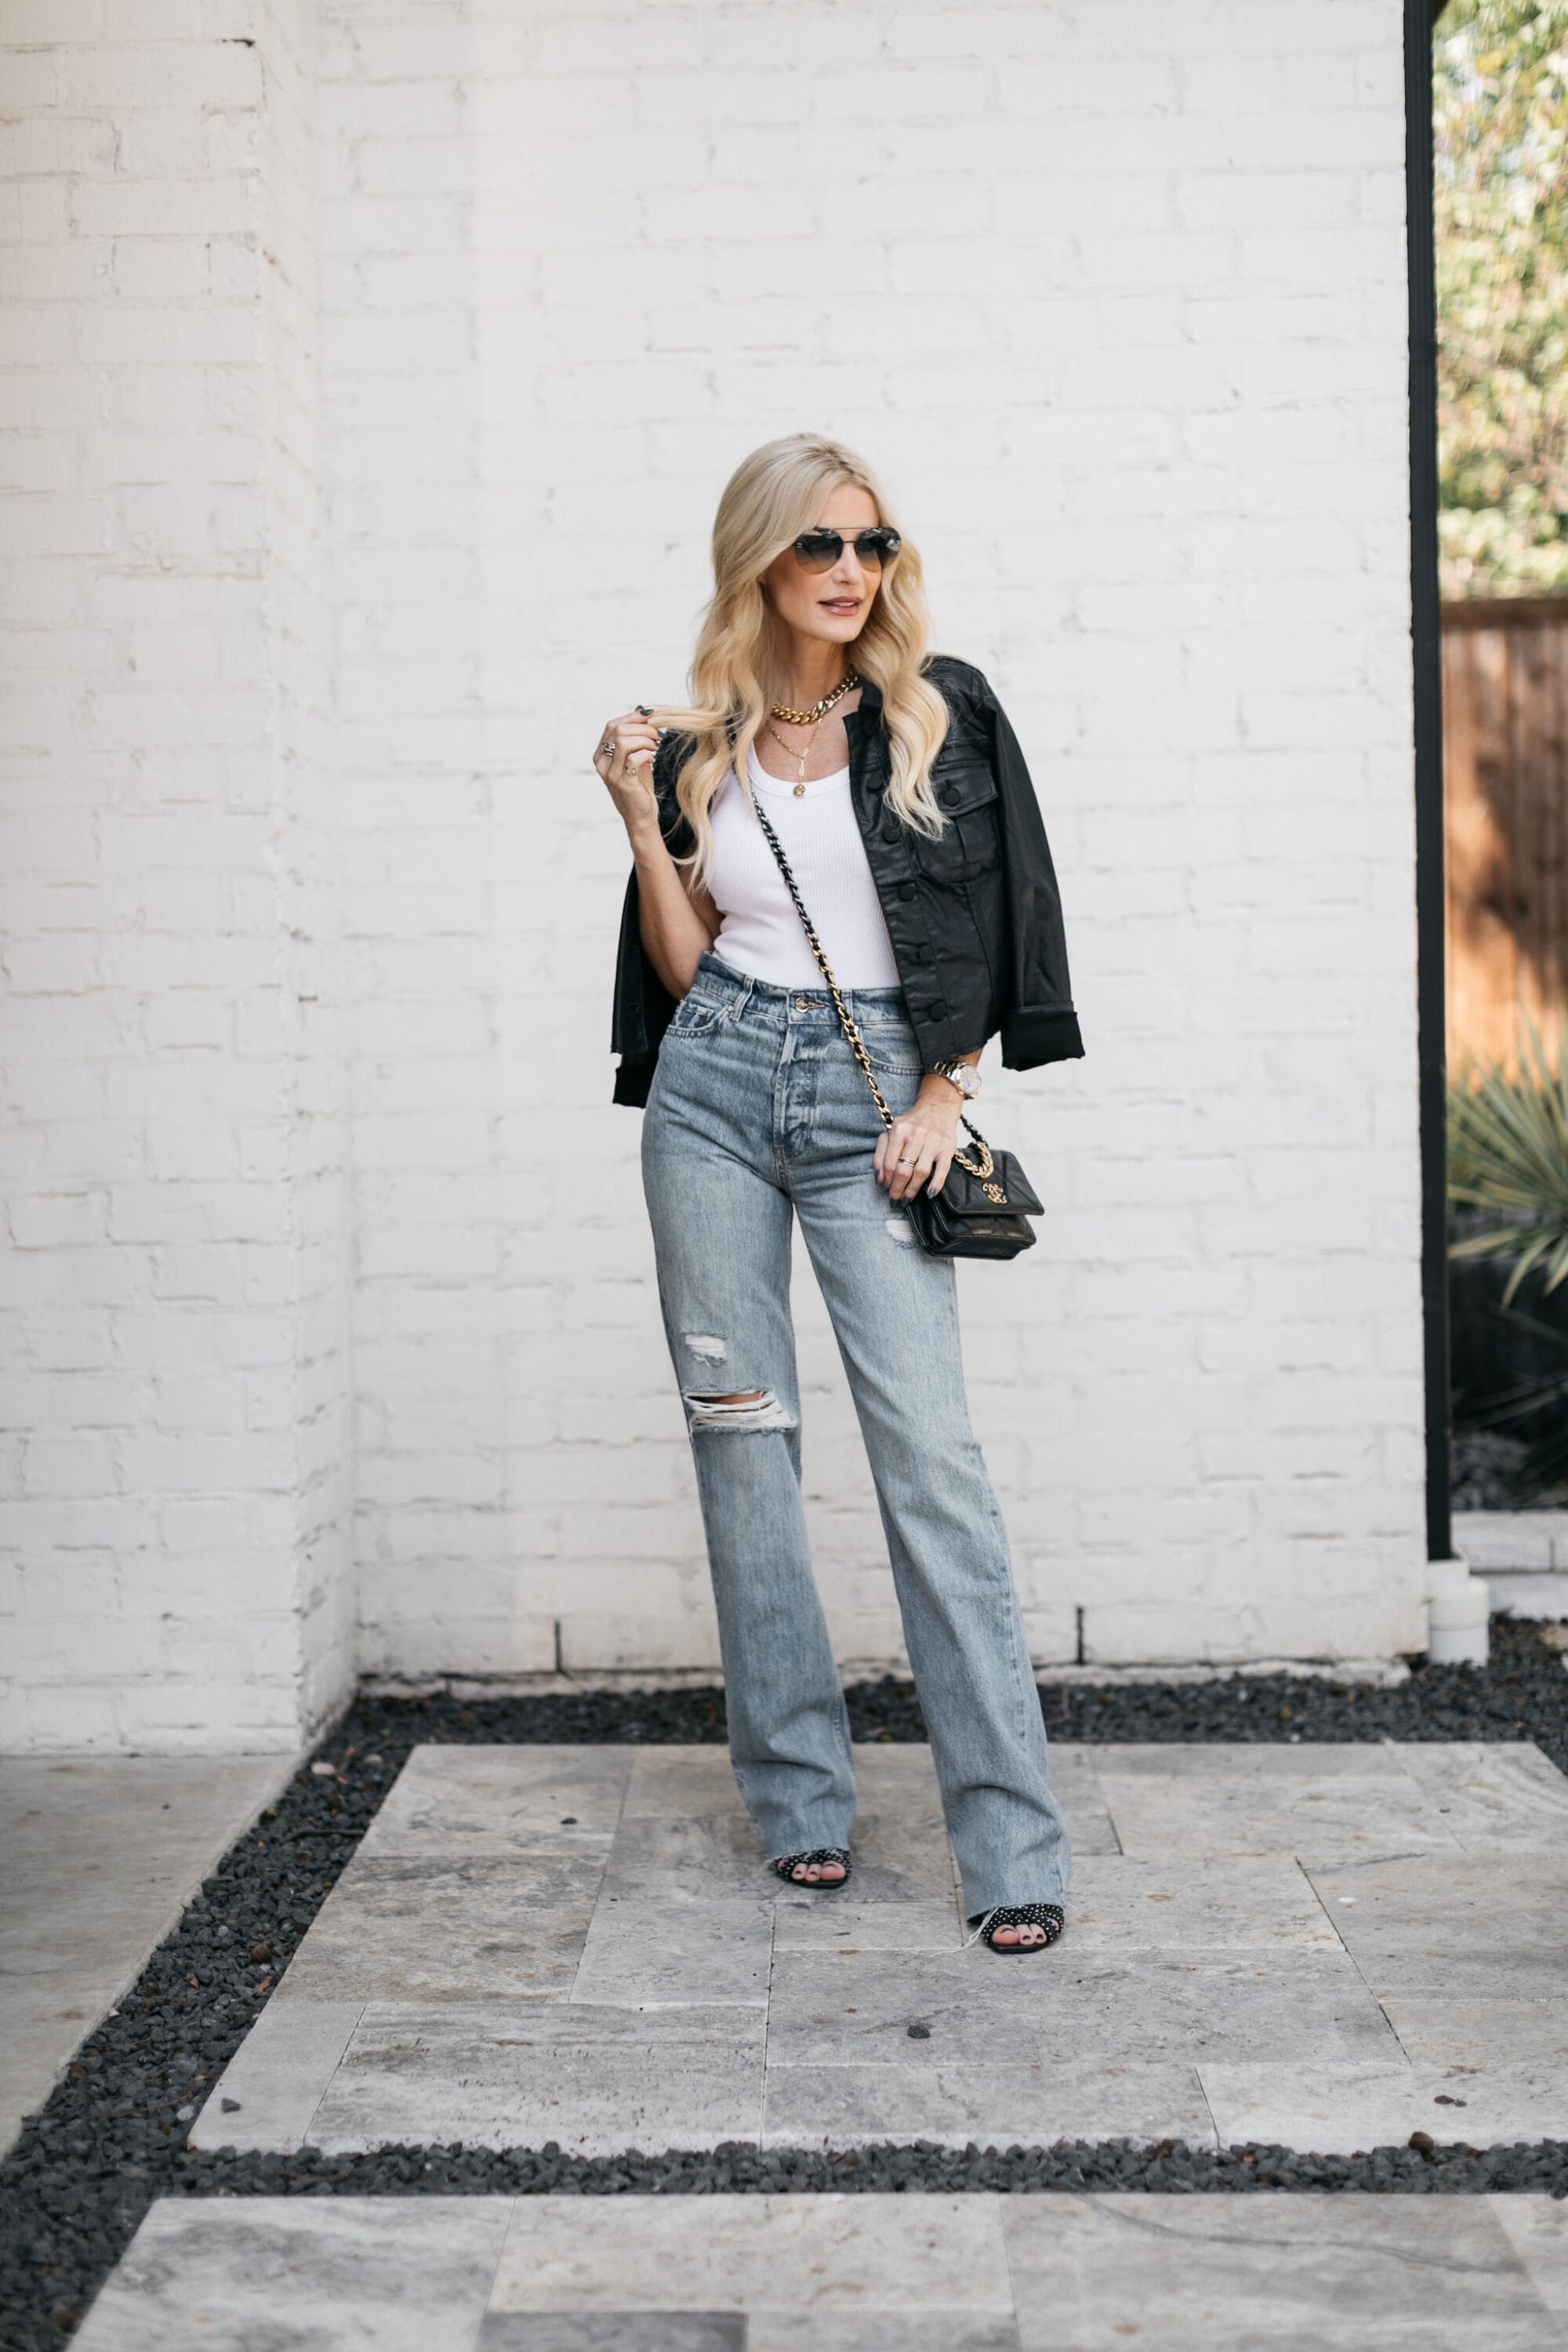 Over 40 fashion influencer wearing baggy denim with a draped jacket for one of 5 ways for how to style baggy denim.